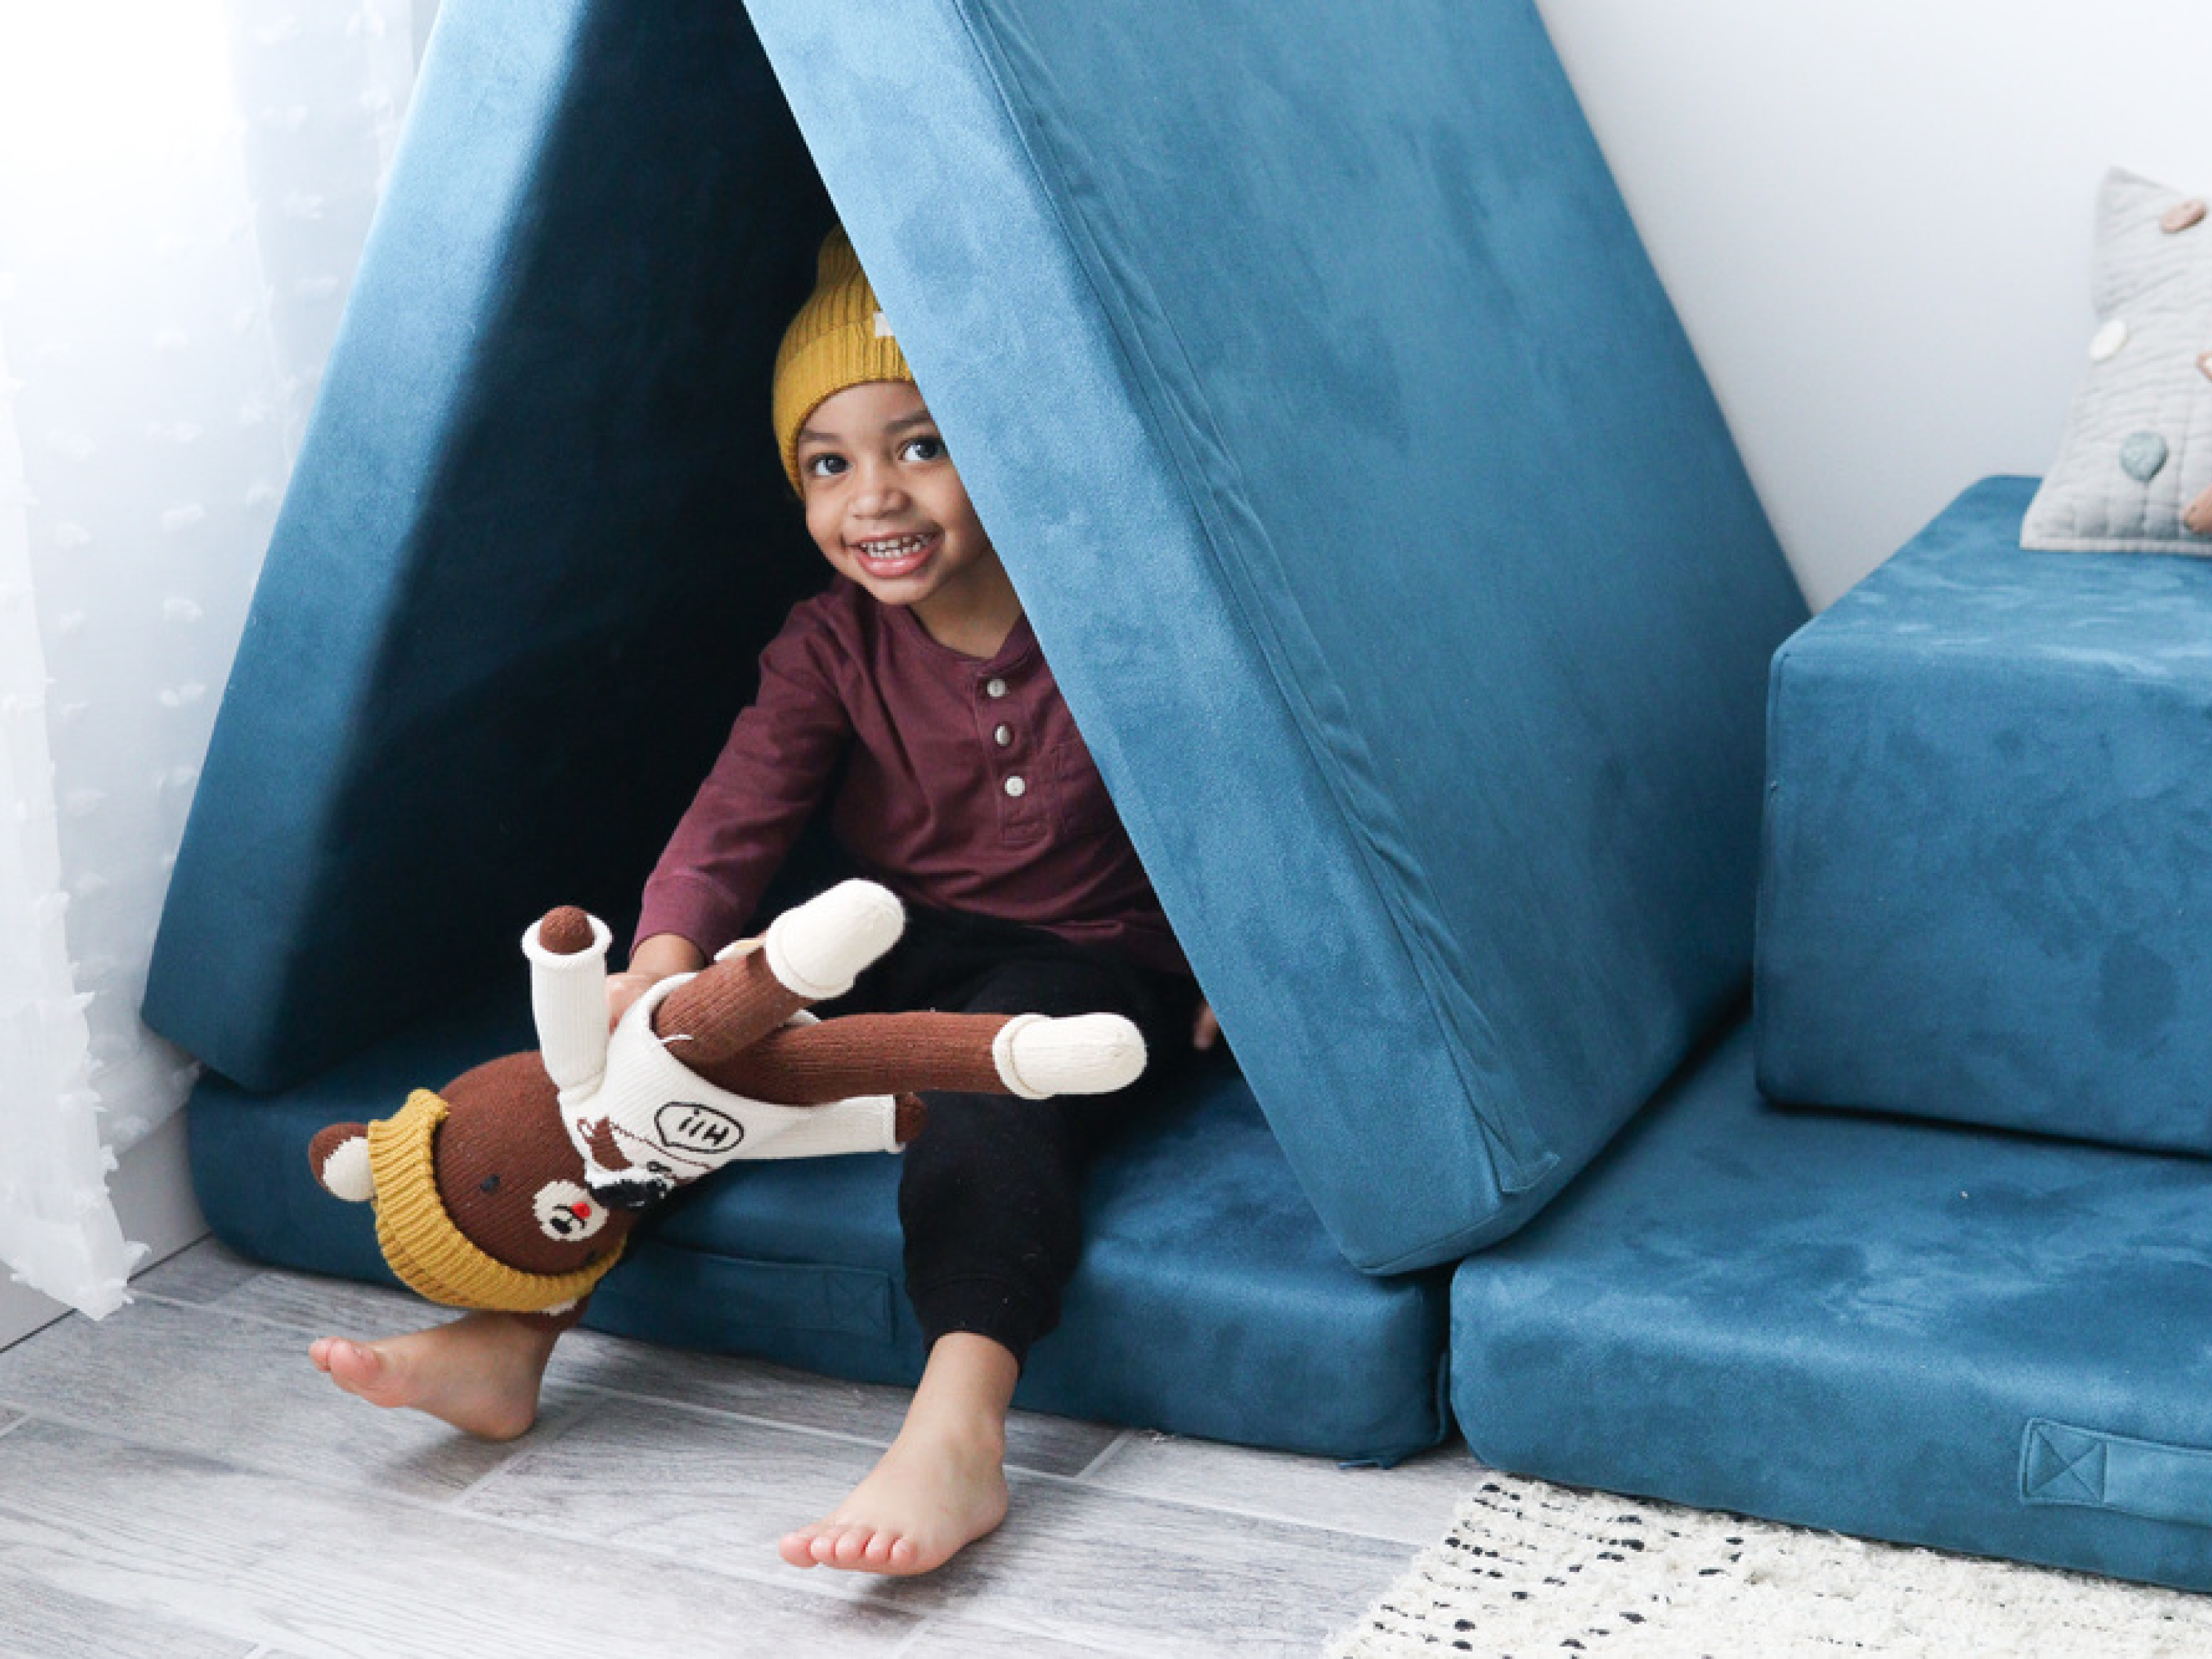 The Figgy Play Couch